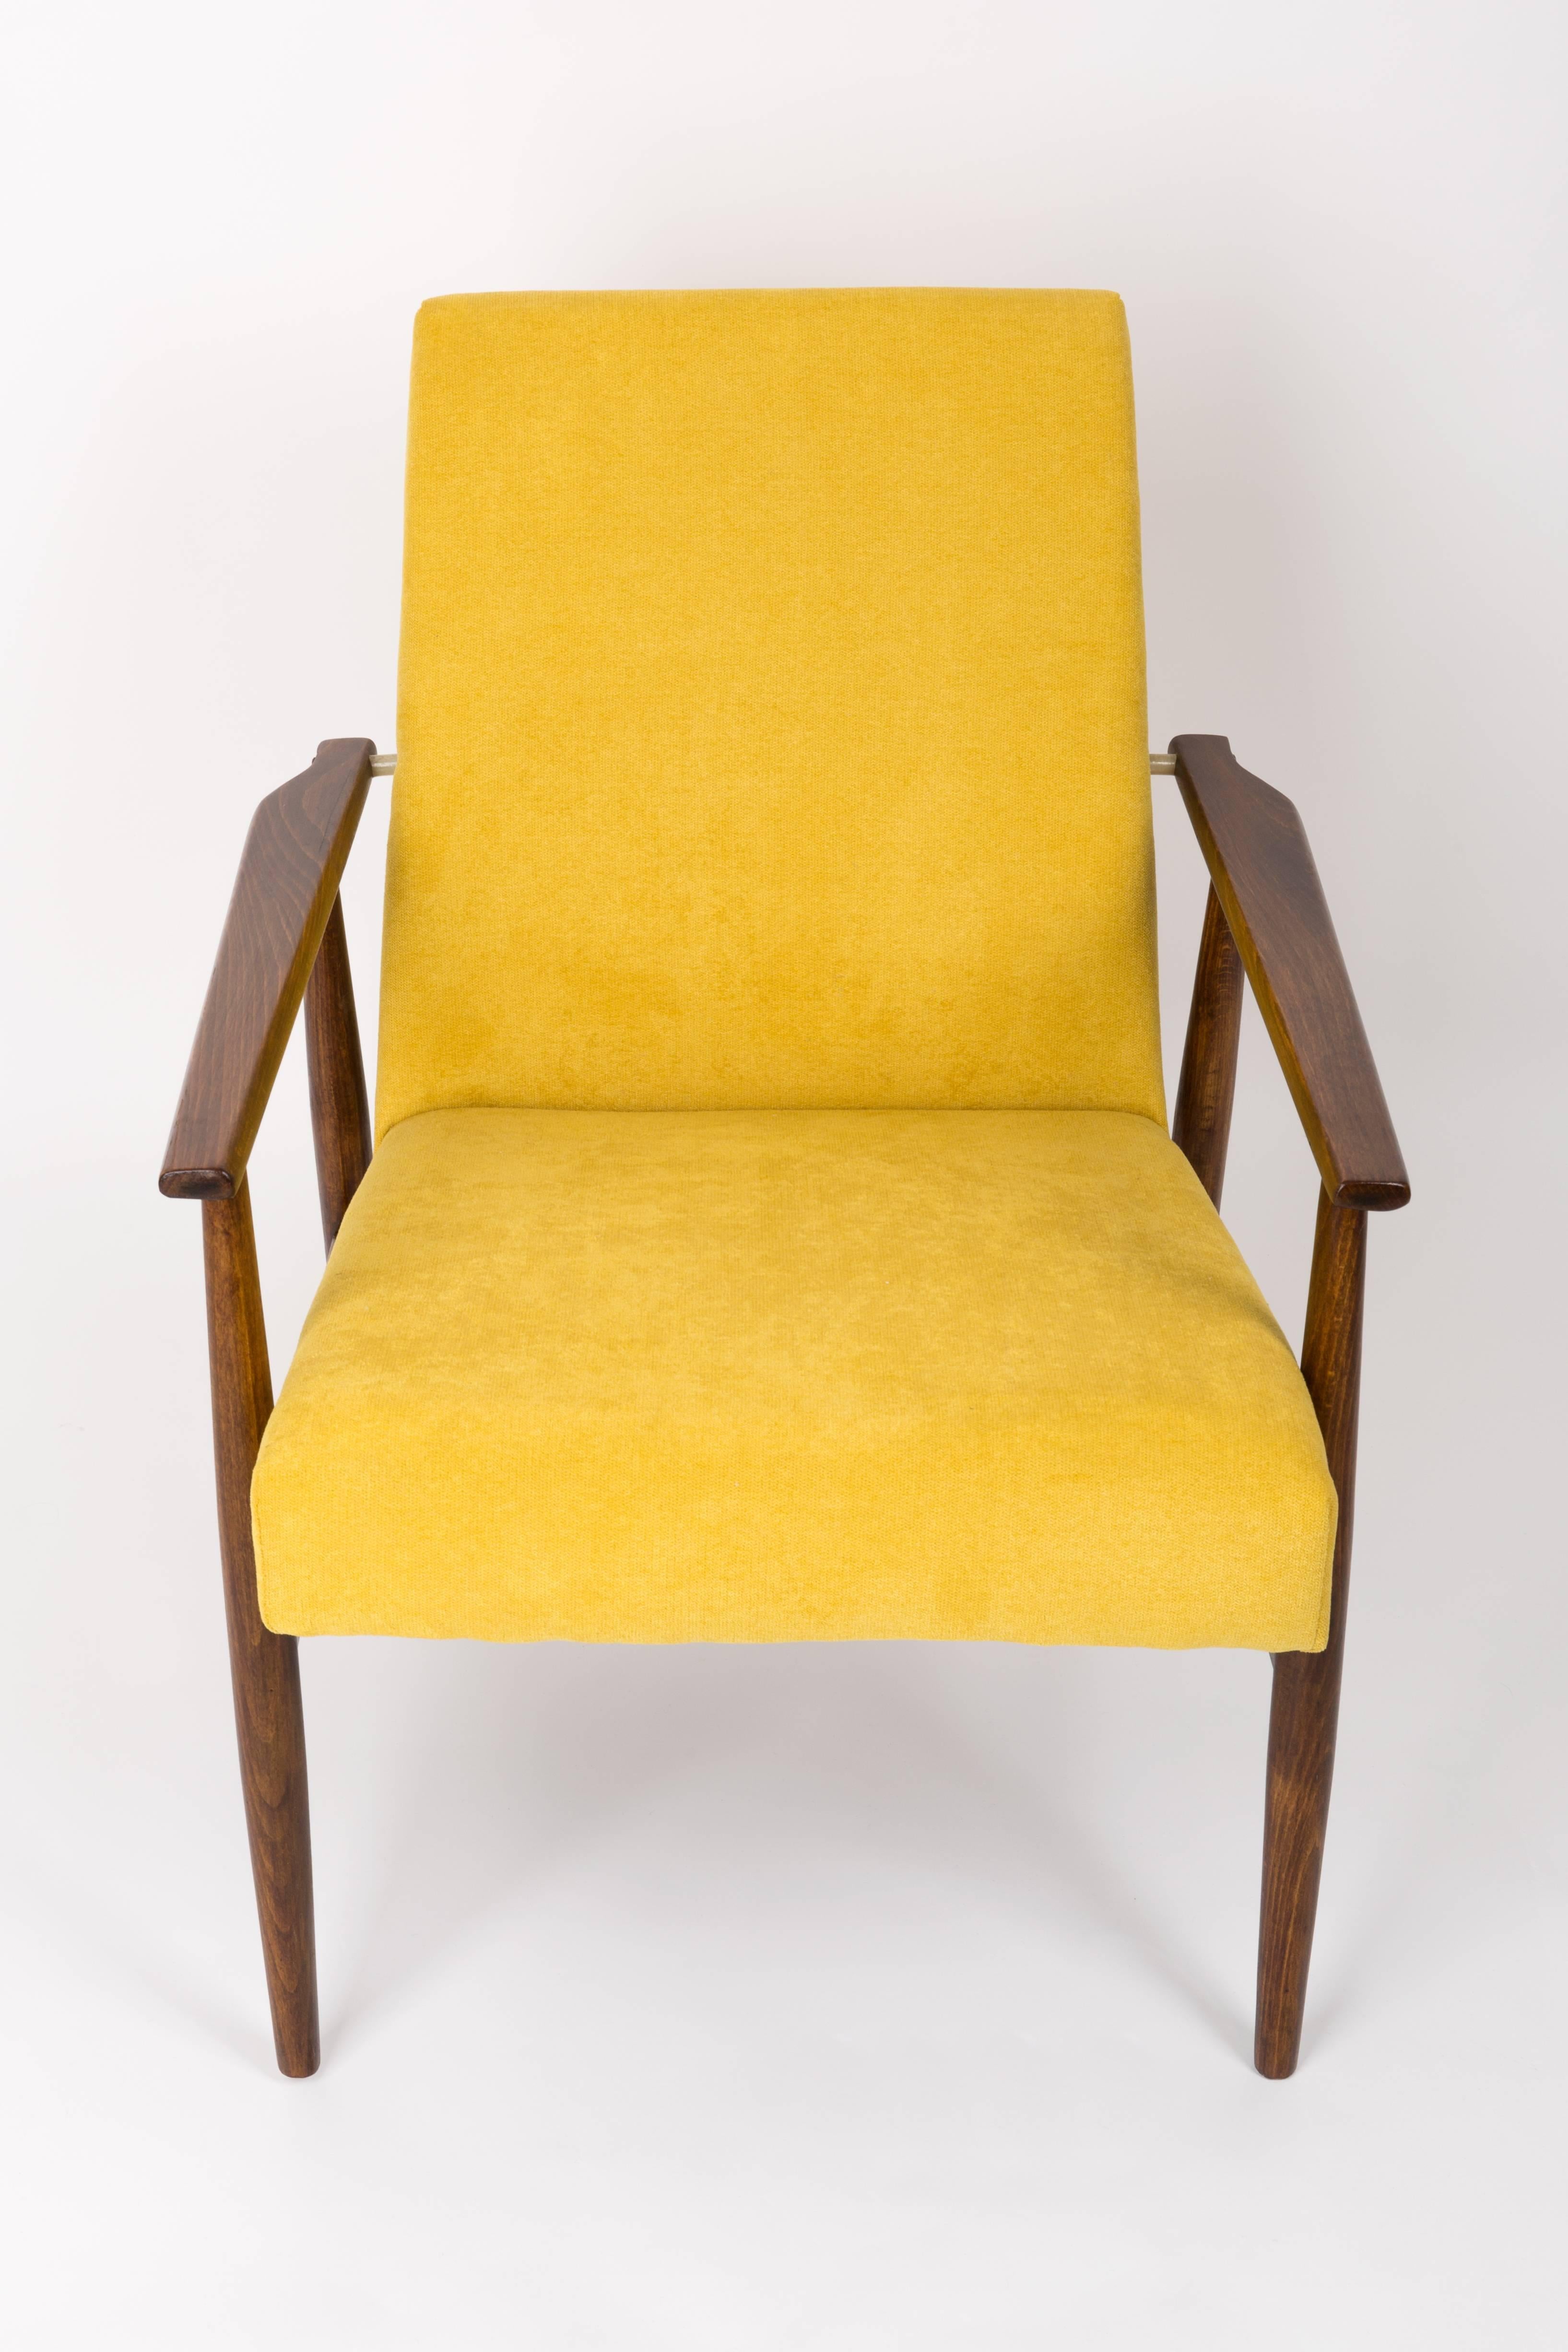 20th Century Pair of Mid Century Yellow Dante Armchairs, H. Lis, Europe, 1960s. For Sale